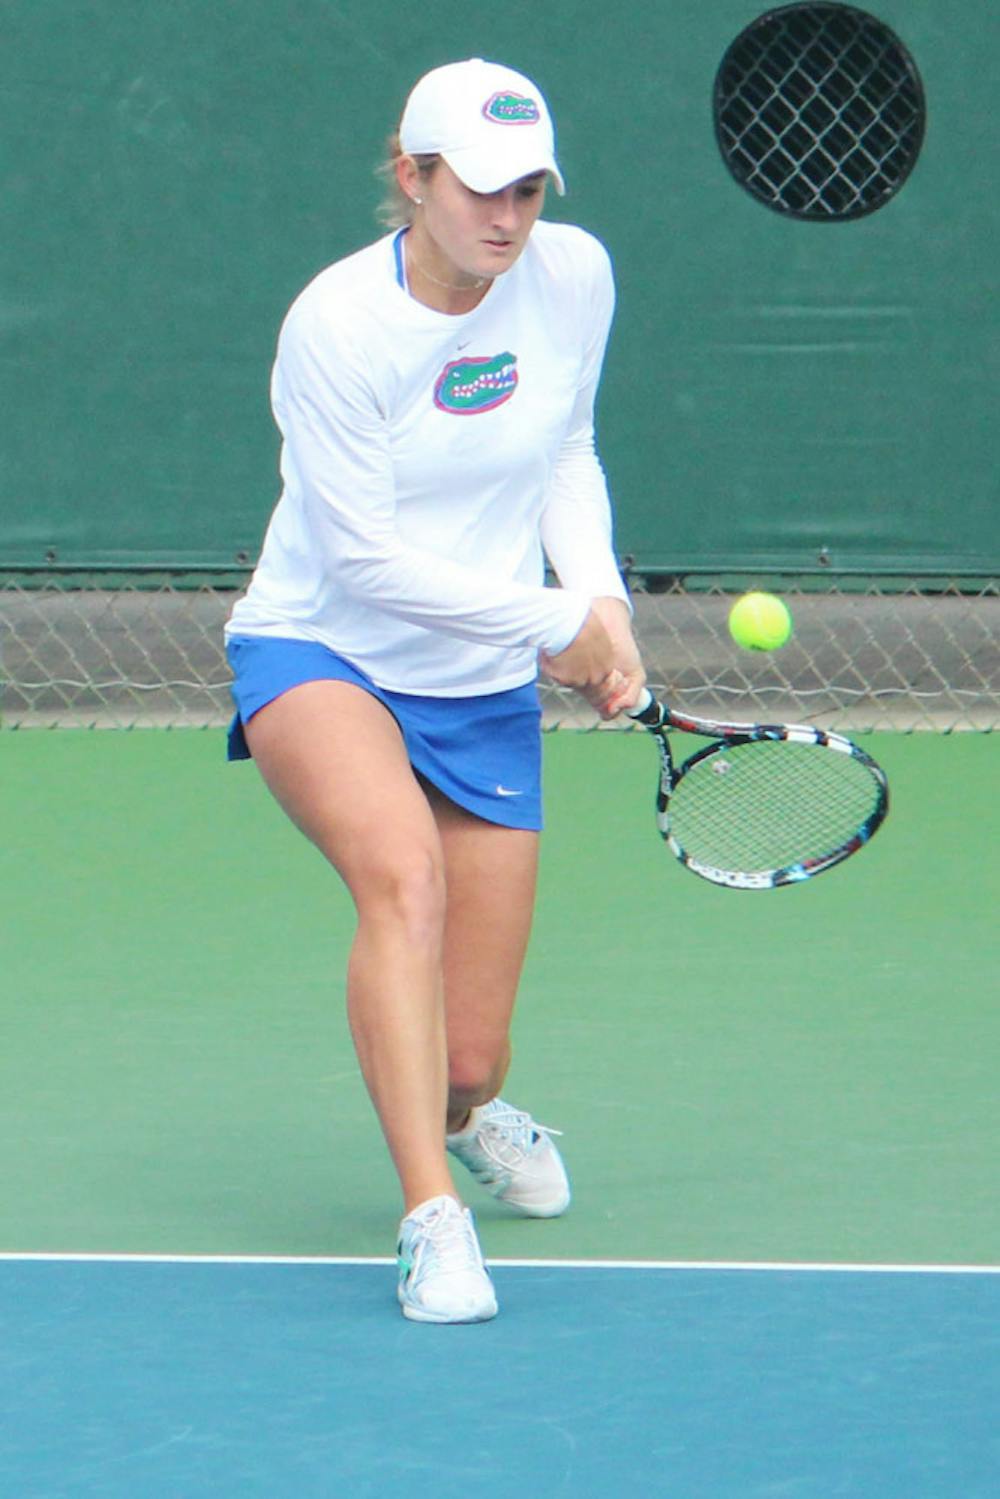 <p>Kourtney Keegan returns a ball during Florida’s 4-0 win against Harvard on Jan. 26 at the Ring Tennis Complex.</p>